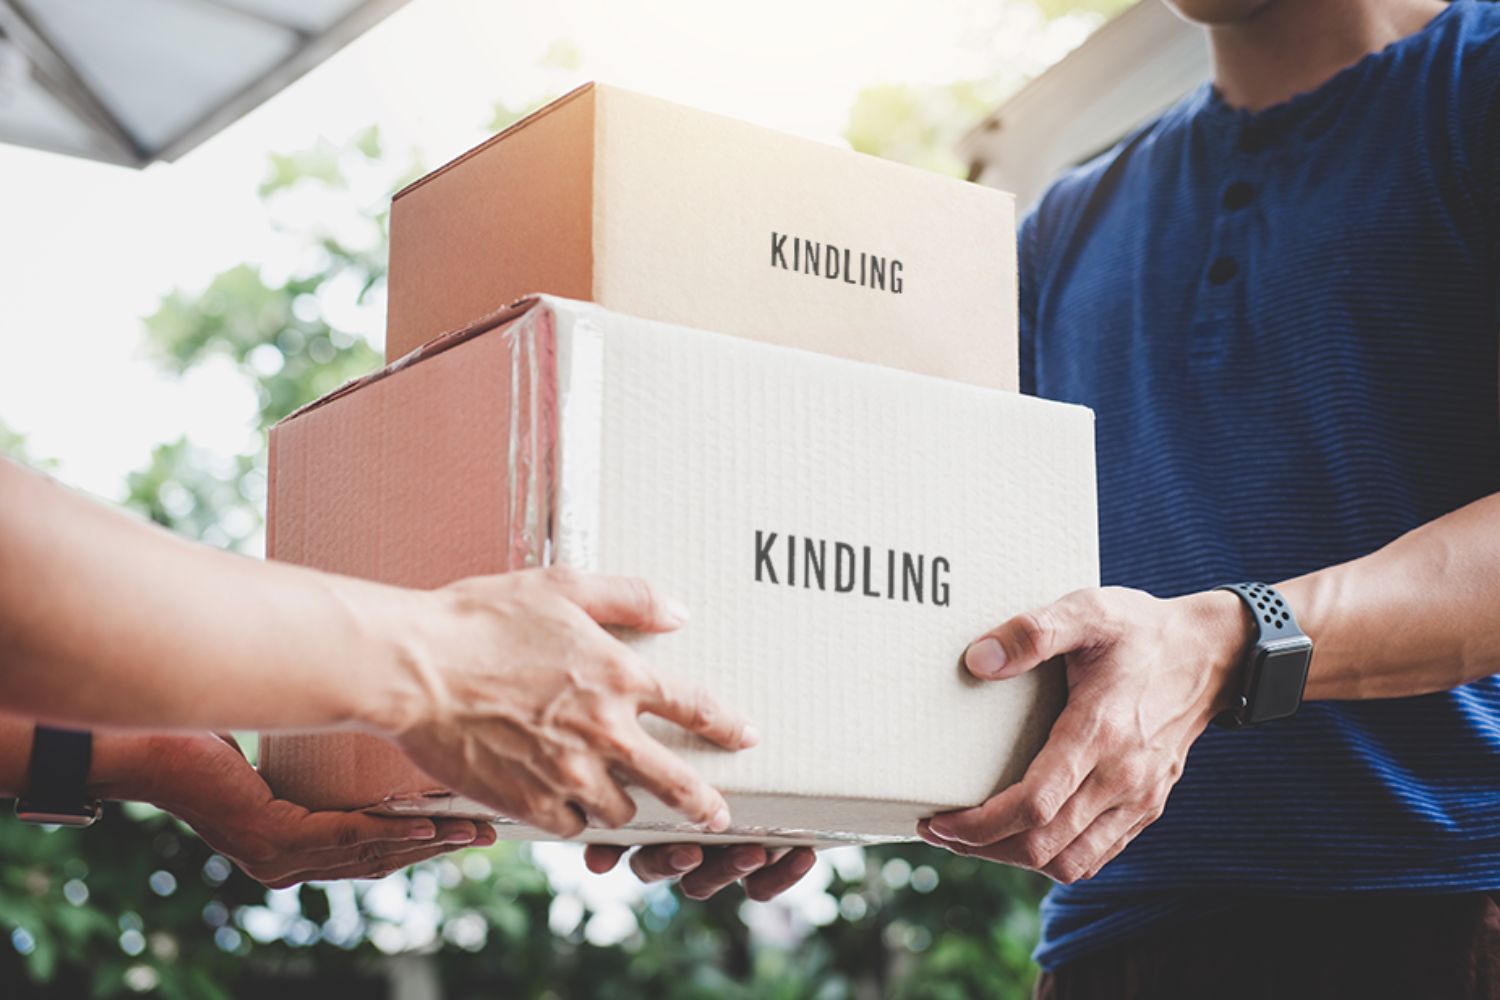 Kindling's Cannabis Delivery Boxes